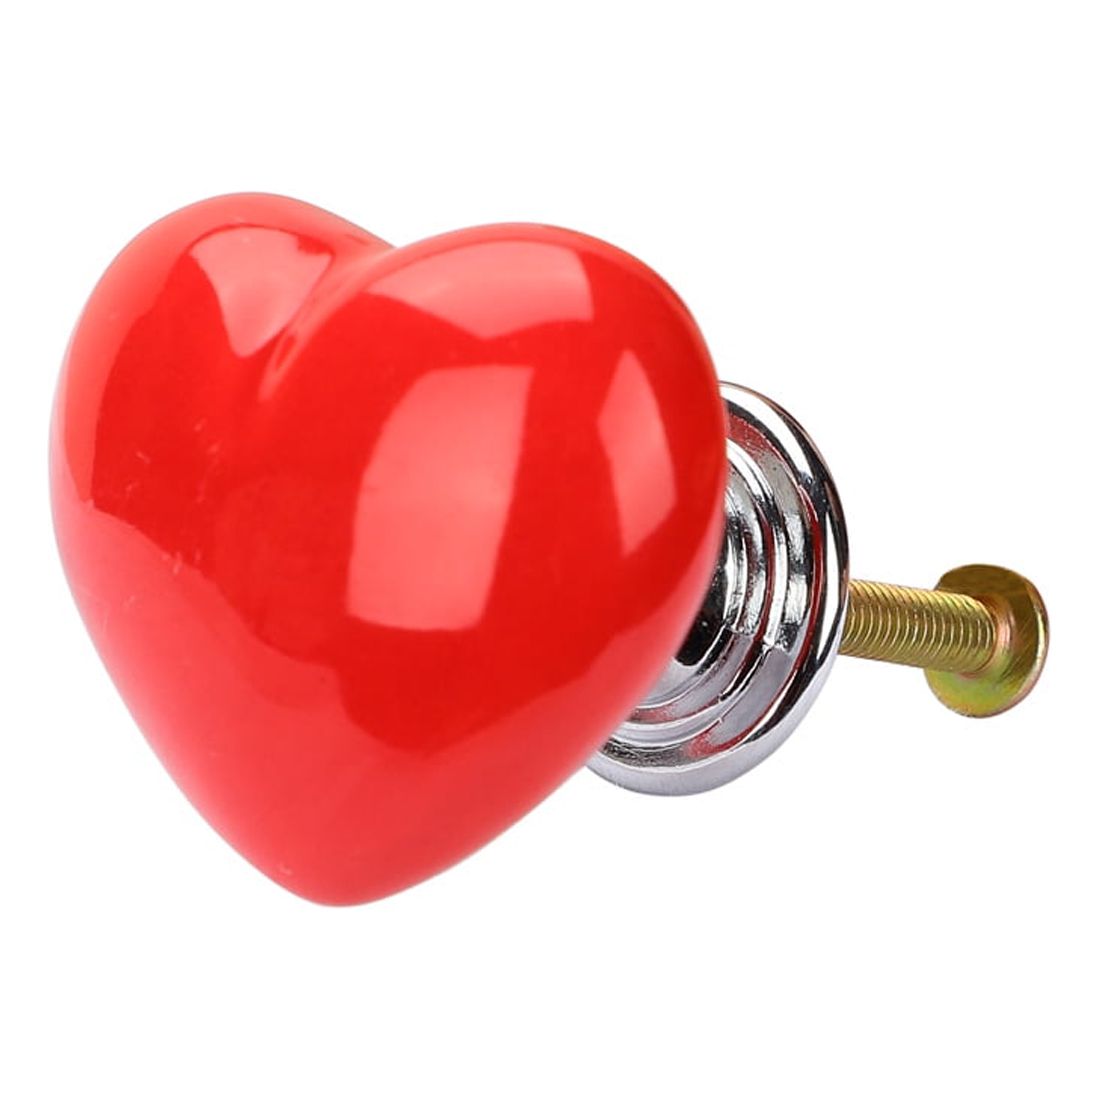 Uxcell Solid Ceramic Knob Heart Shaped Drawer Knob Pull Handle Cupboard Wardrobe Red - image 1 of 7